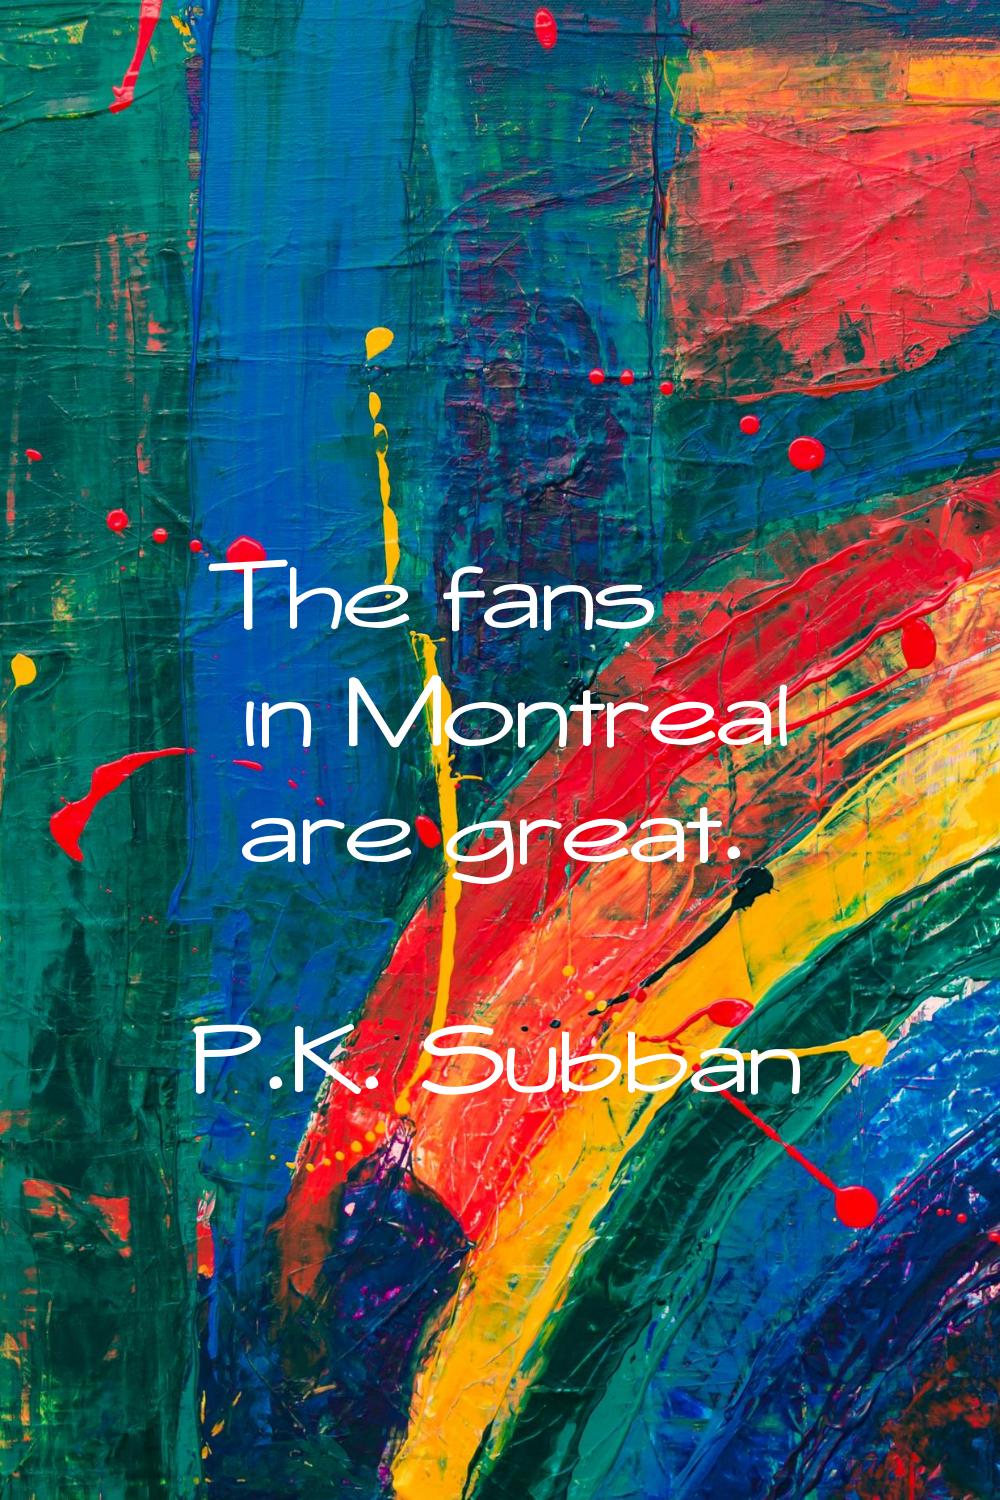 The fans in Montreal are great.